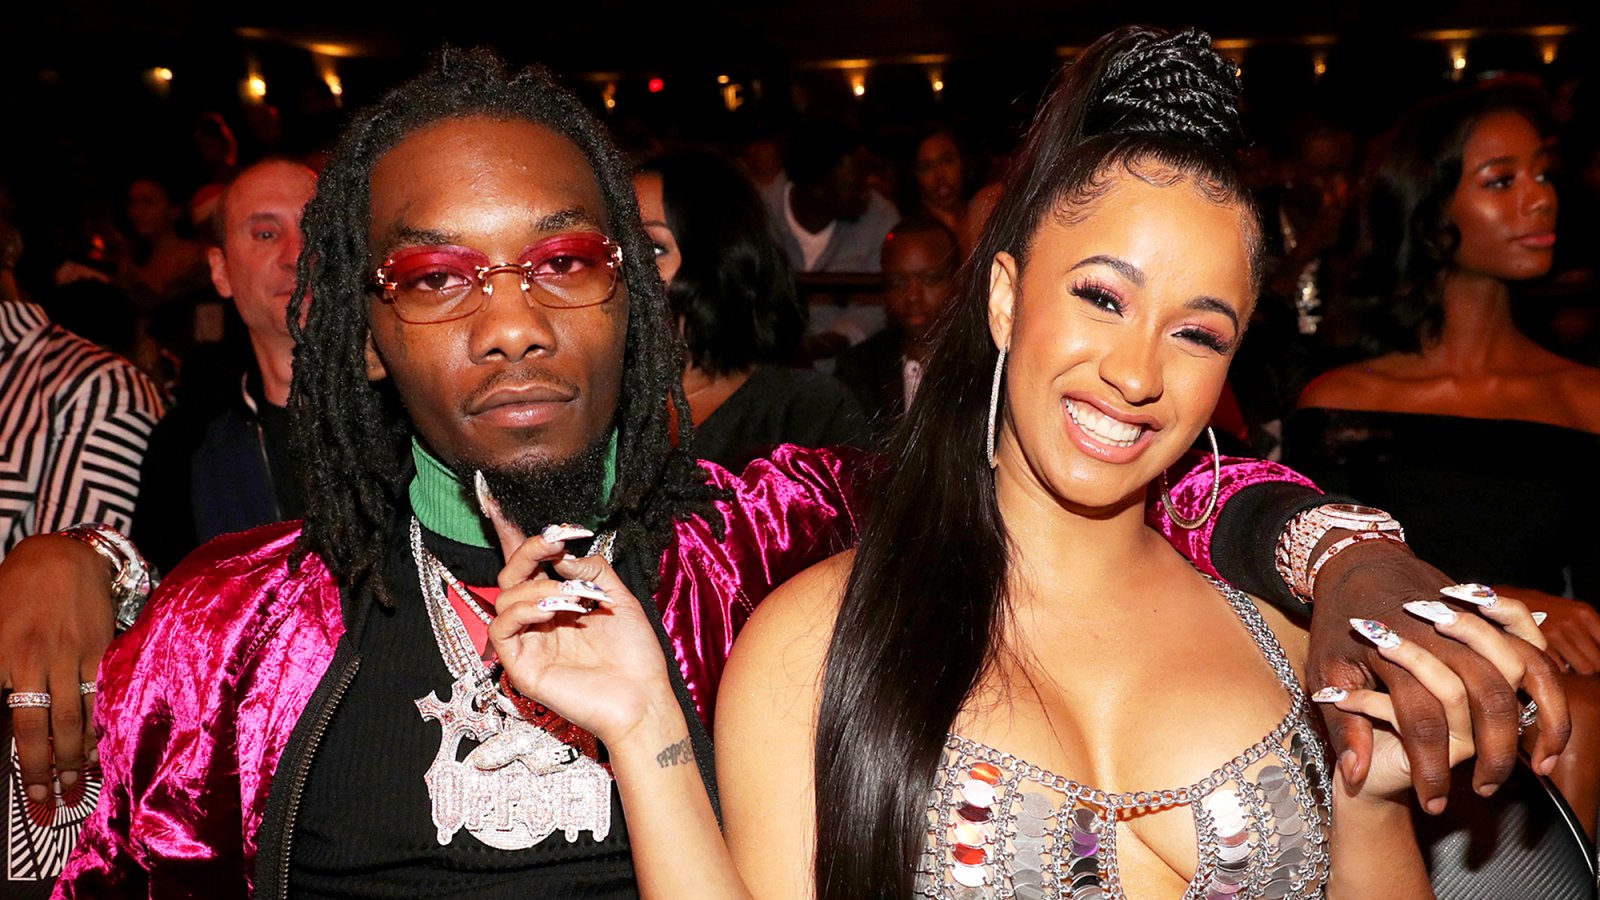 Offset and Cardi B attend the 2017 BET Hip Hop Awards on October 6, 2017 in Miami Beach, Florida.